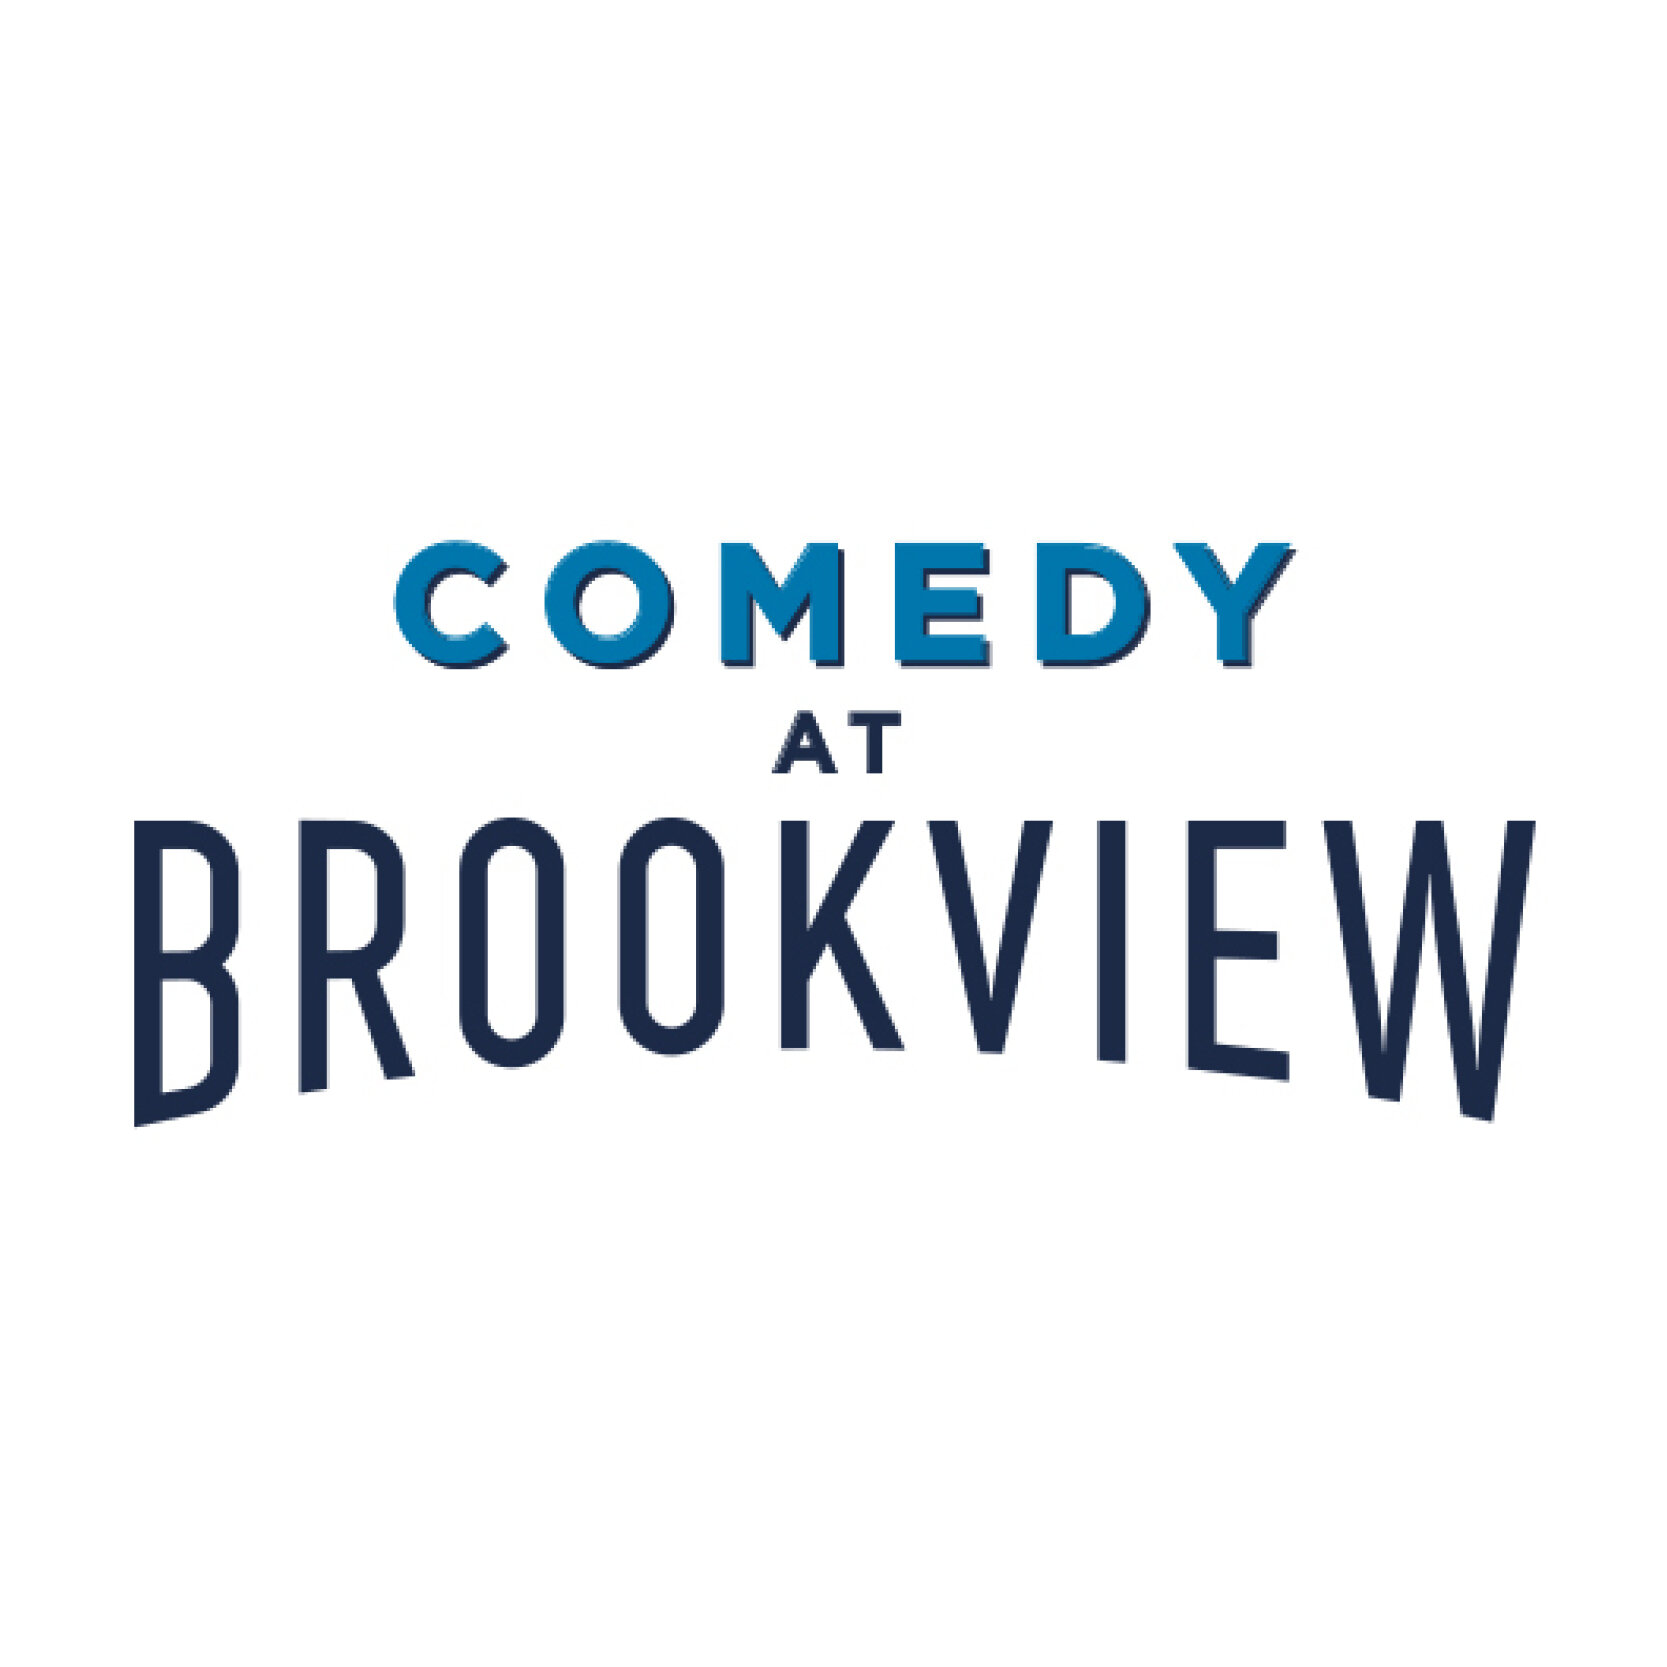 Comedy at Brookview